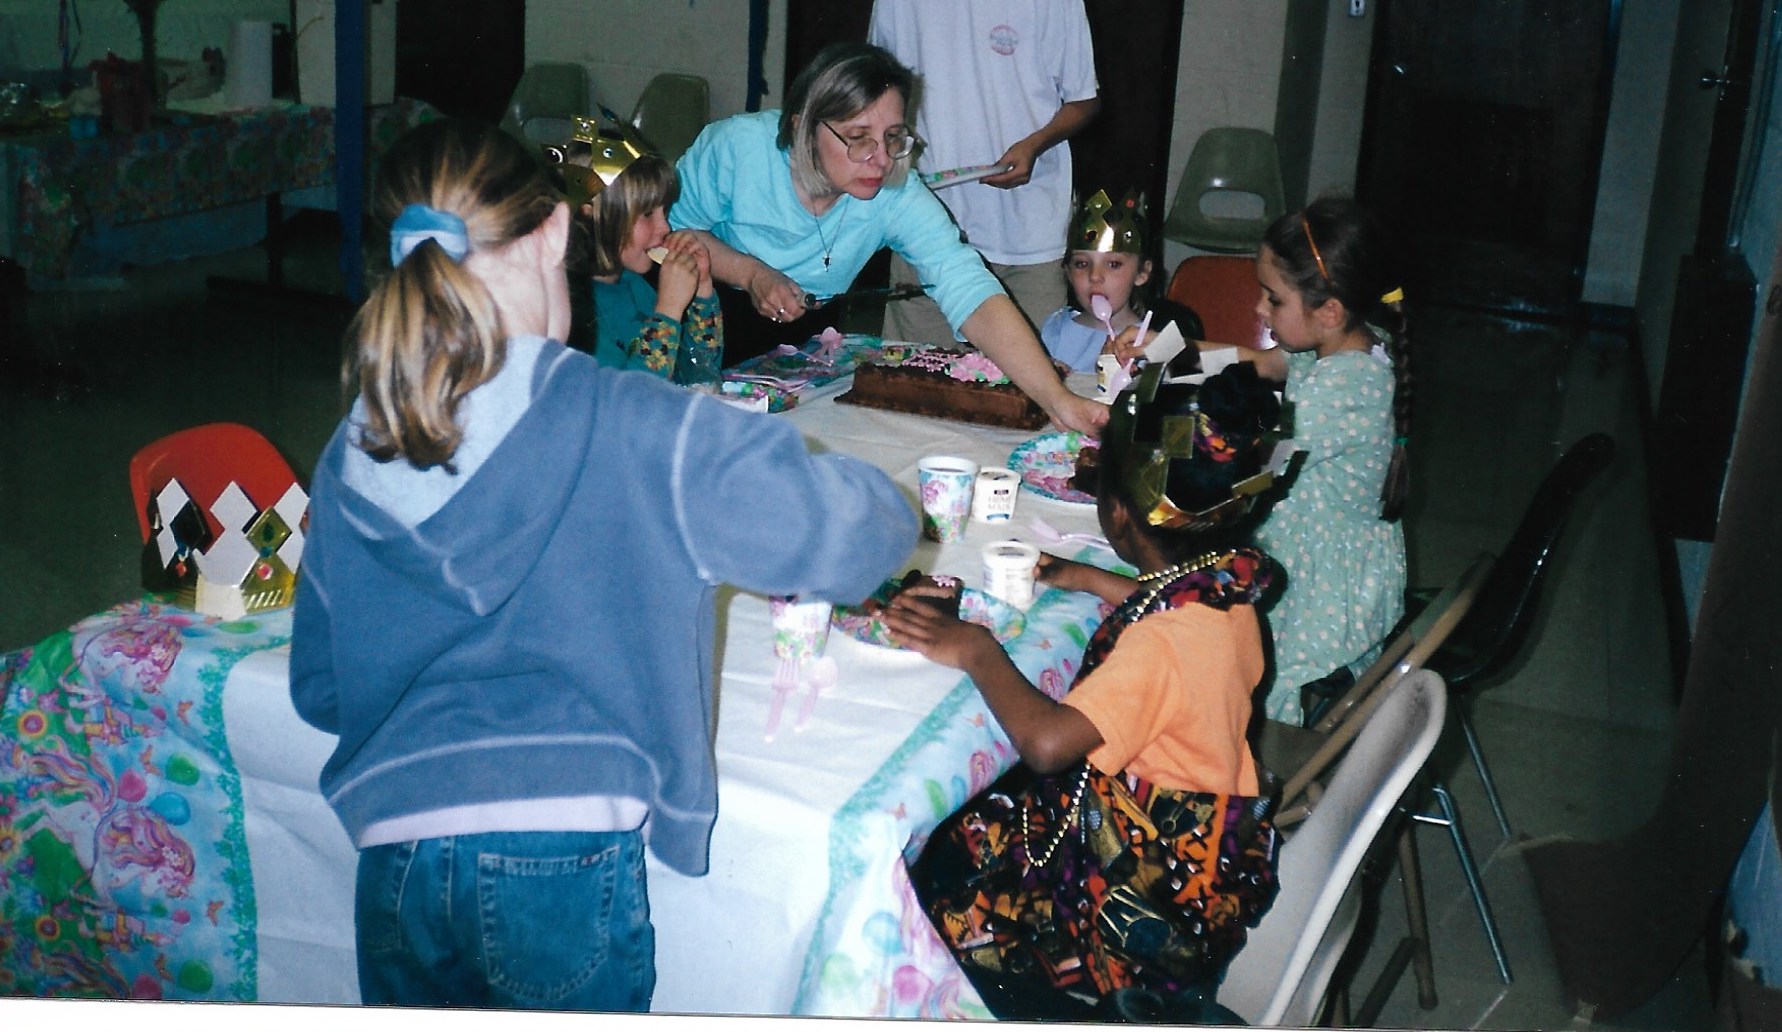 Leslie King serves birthday cake during daughter Olivia's sixth birthday celebration at the former YWCA on Lawrenceville Highway in Decatur.  (Courtesy of the King family)